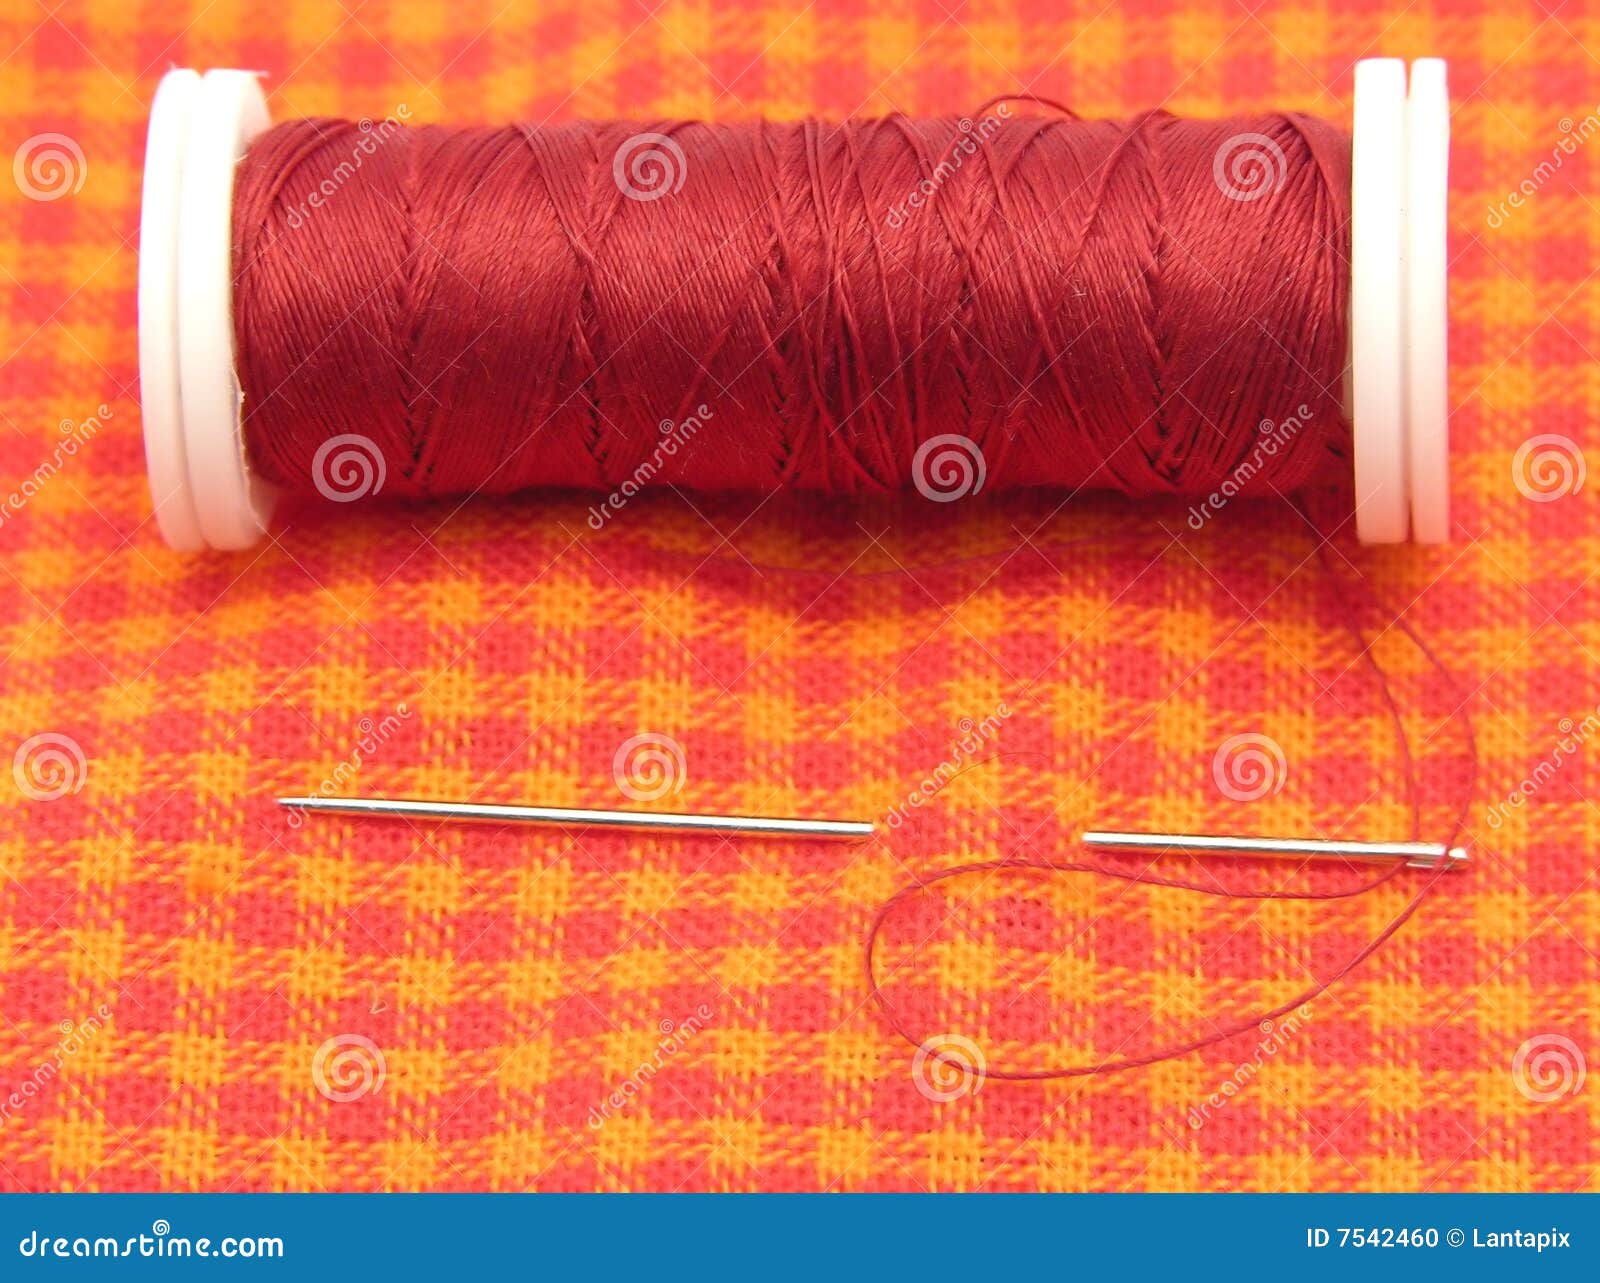 Cloth With Needle And Thread Stock Photo - Image of work, housework ...